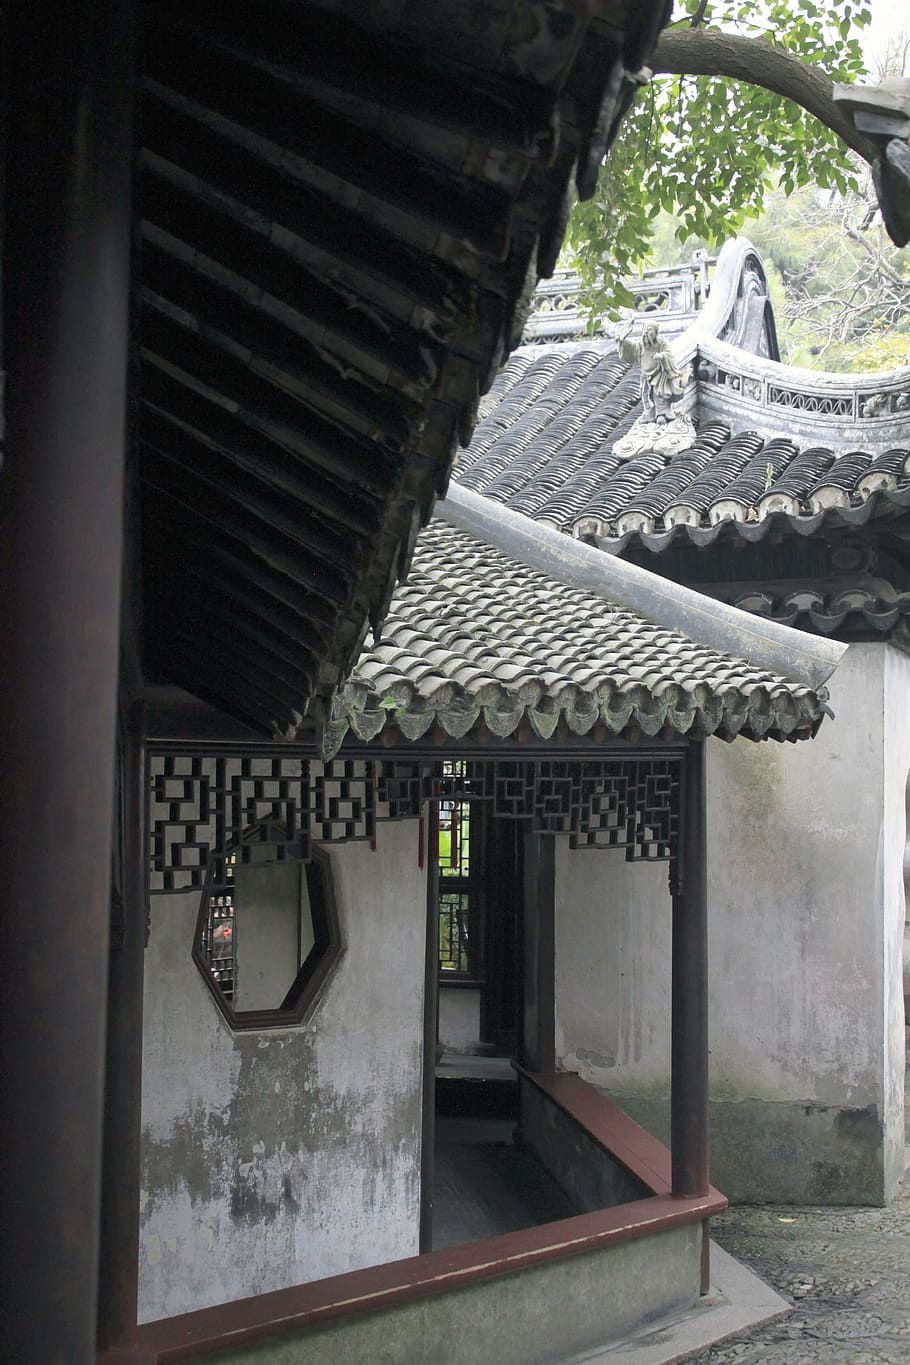 china, chinese, garden, asia, traditional, building, landscape, park, east, culture